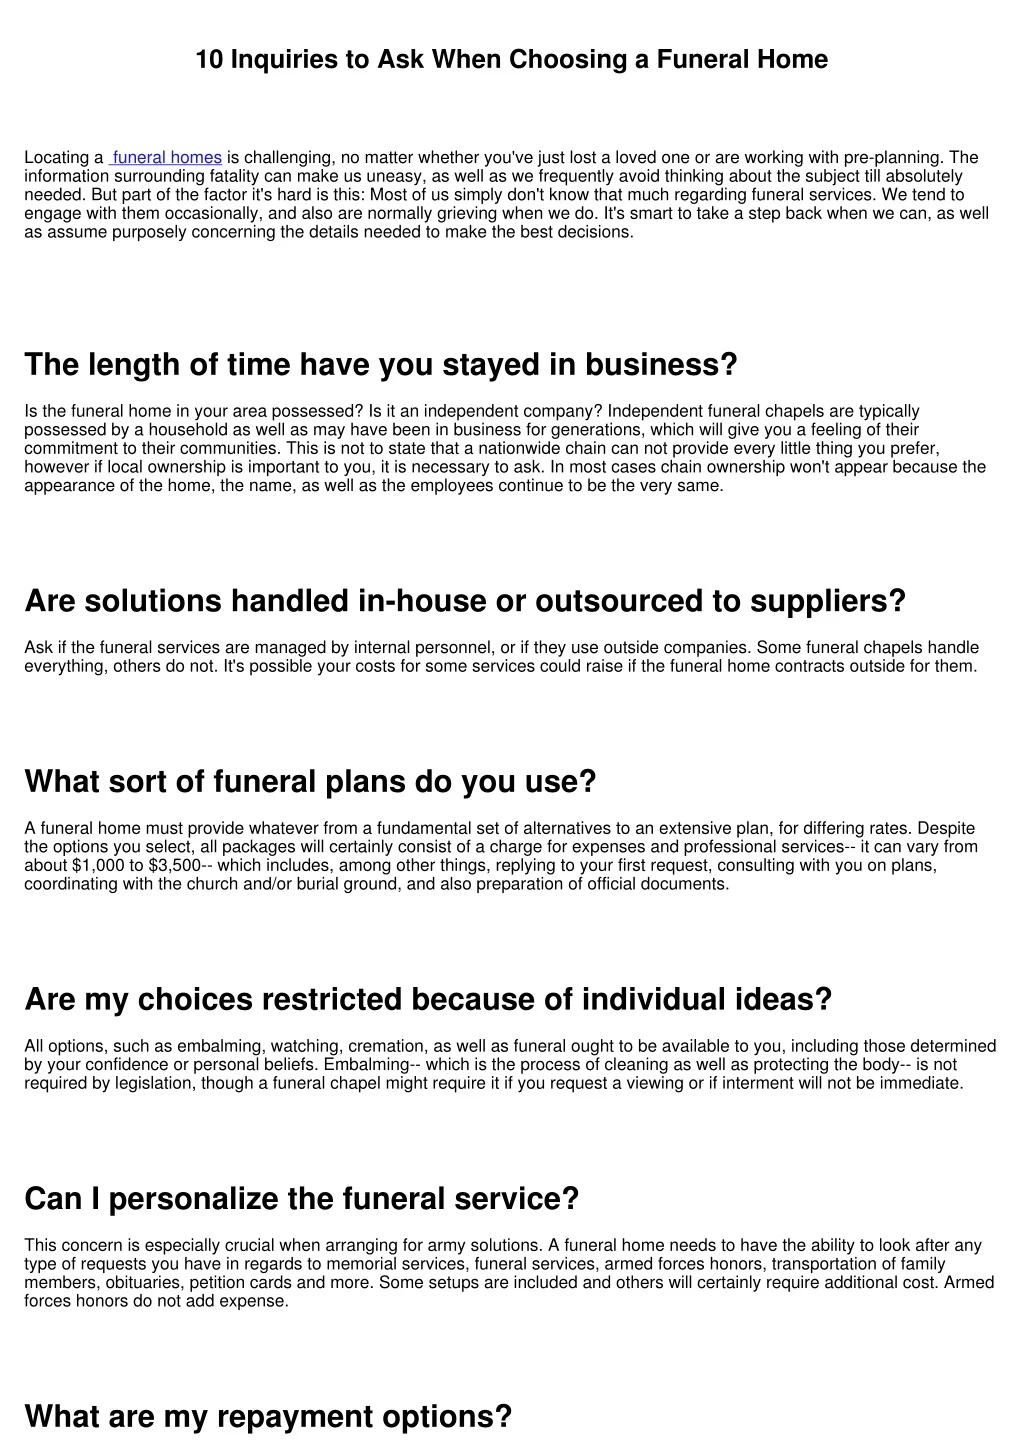 10 inquiries to ask when choosing a funeral home